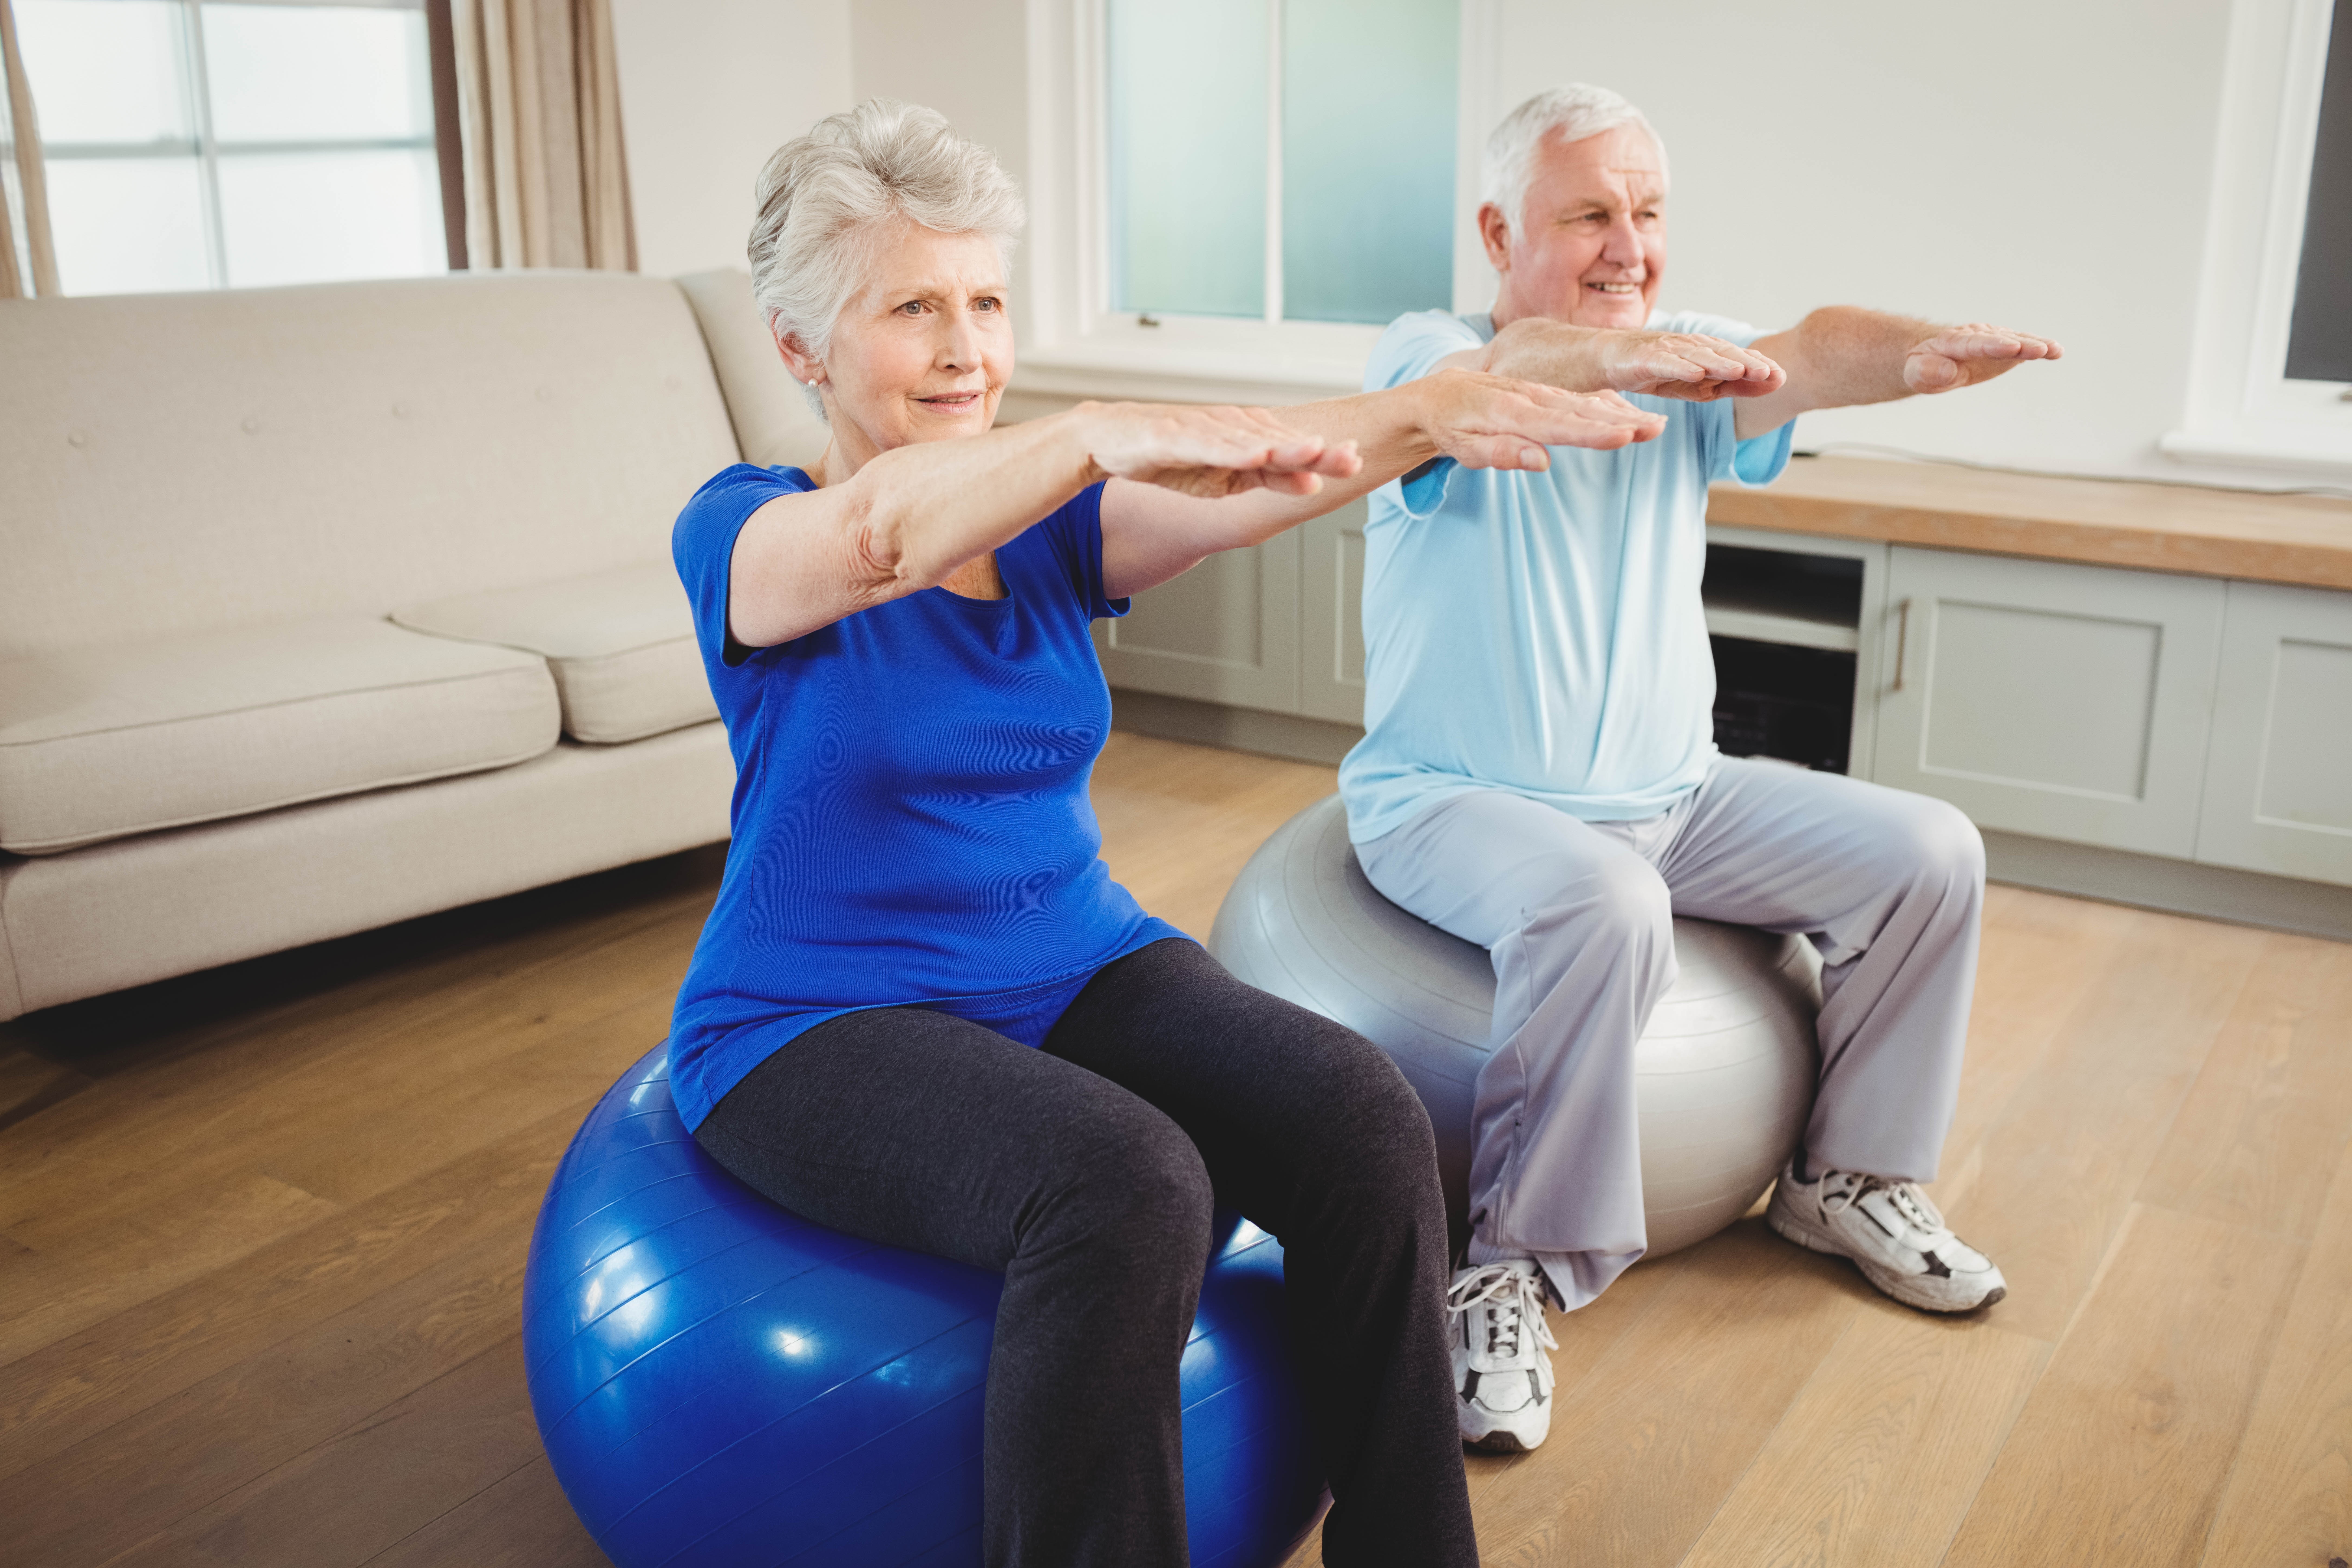 Fitness over Fifty: Healthy Exercise Tips To Get You Started